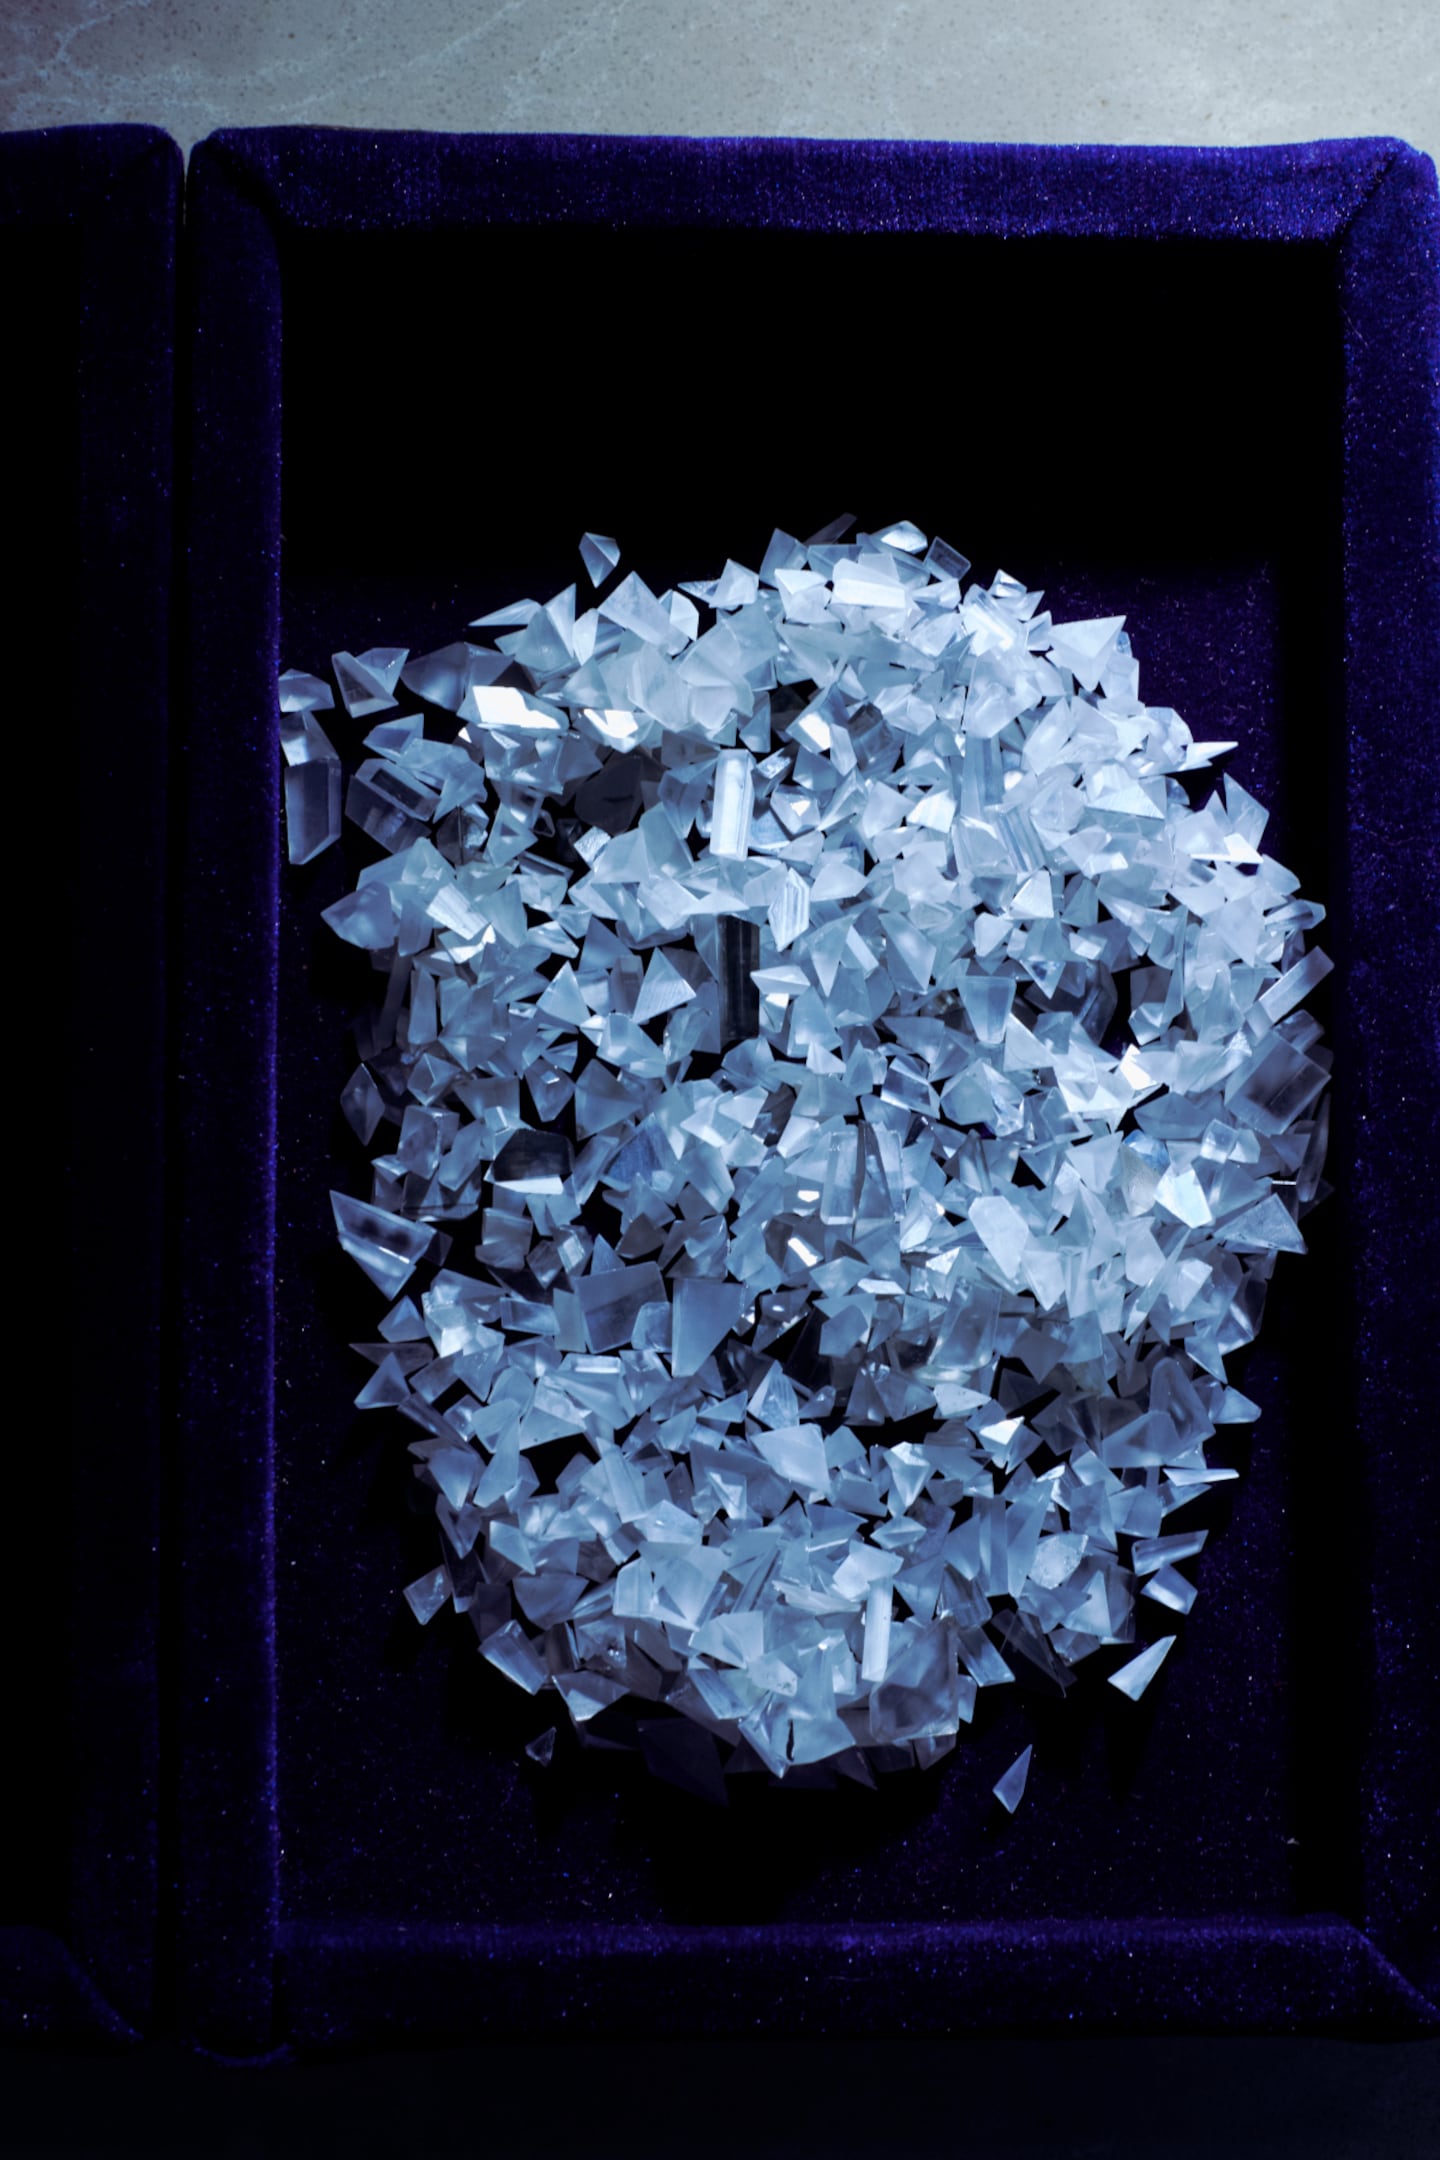 A pile of rough diamonds sits in a container lined in dark velvet.